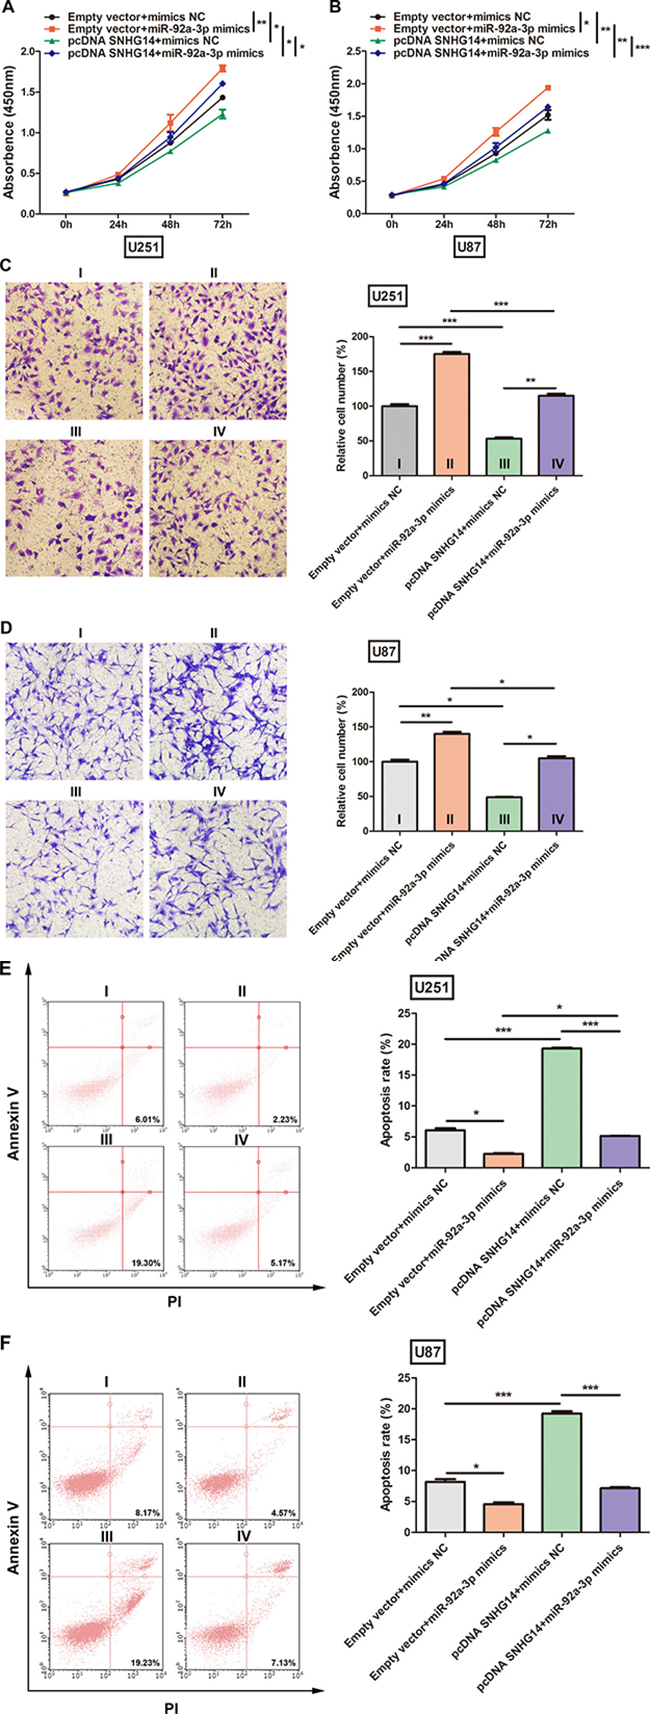 miR-92a-3p inhibited SNHG14 function in glioma.